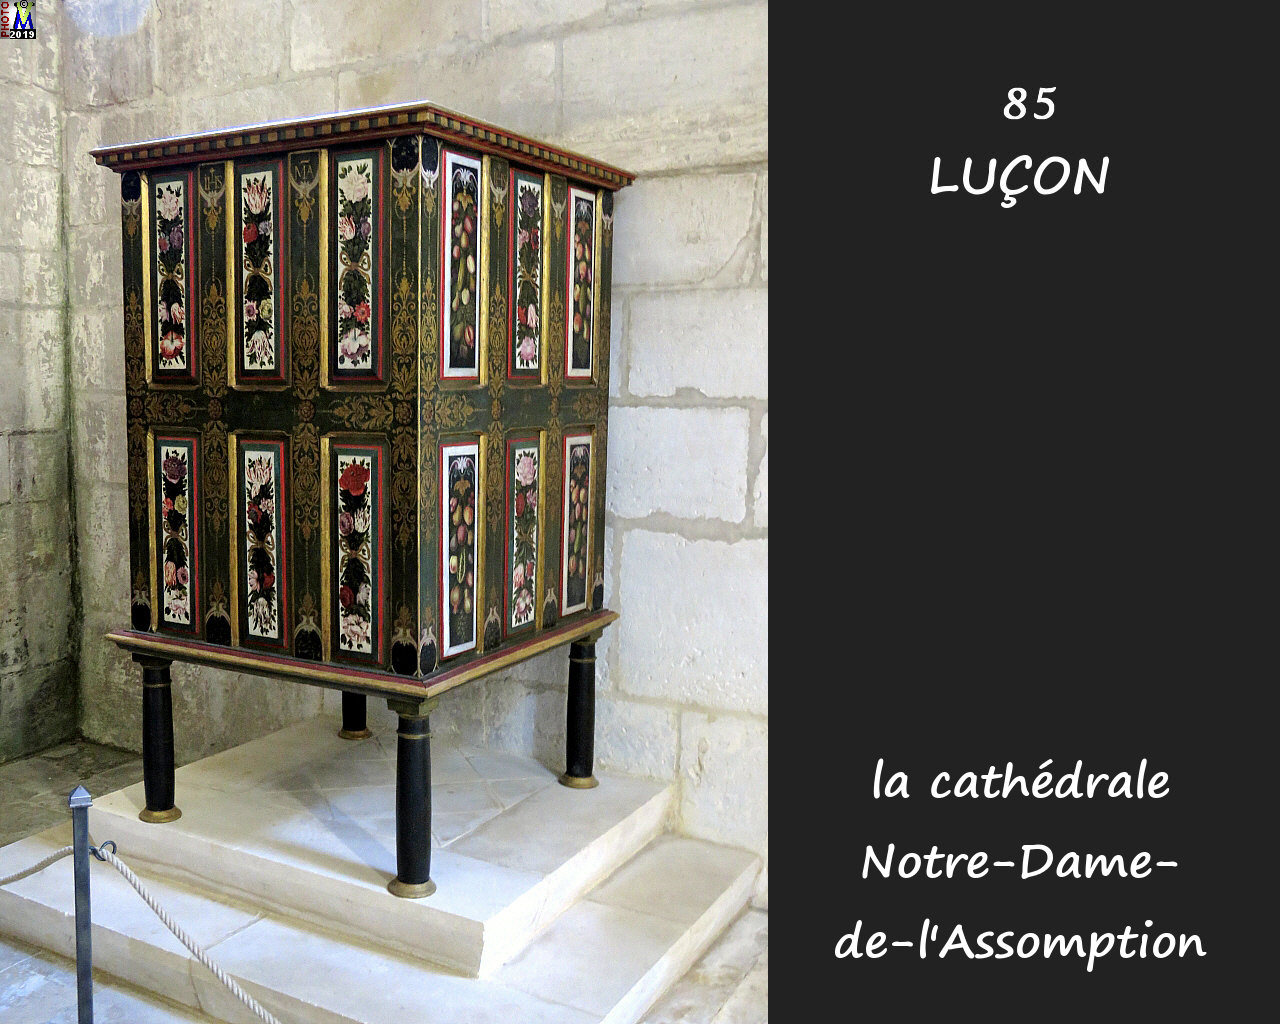 85LUCON_cathedrale_300.jpg